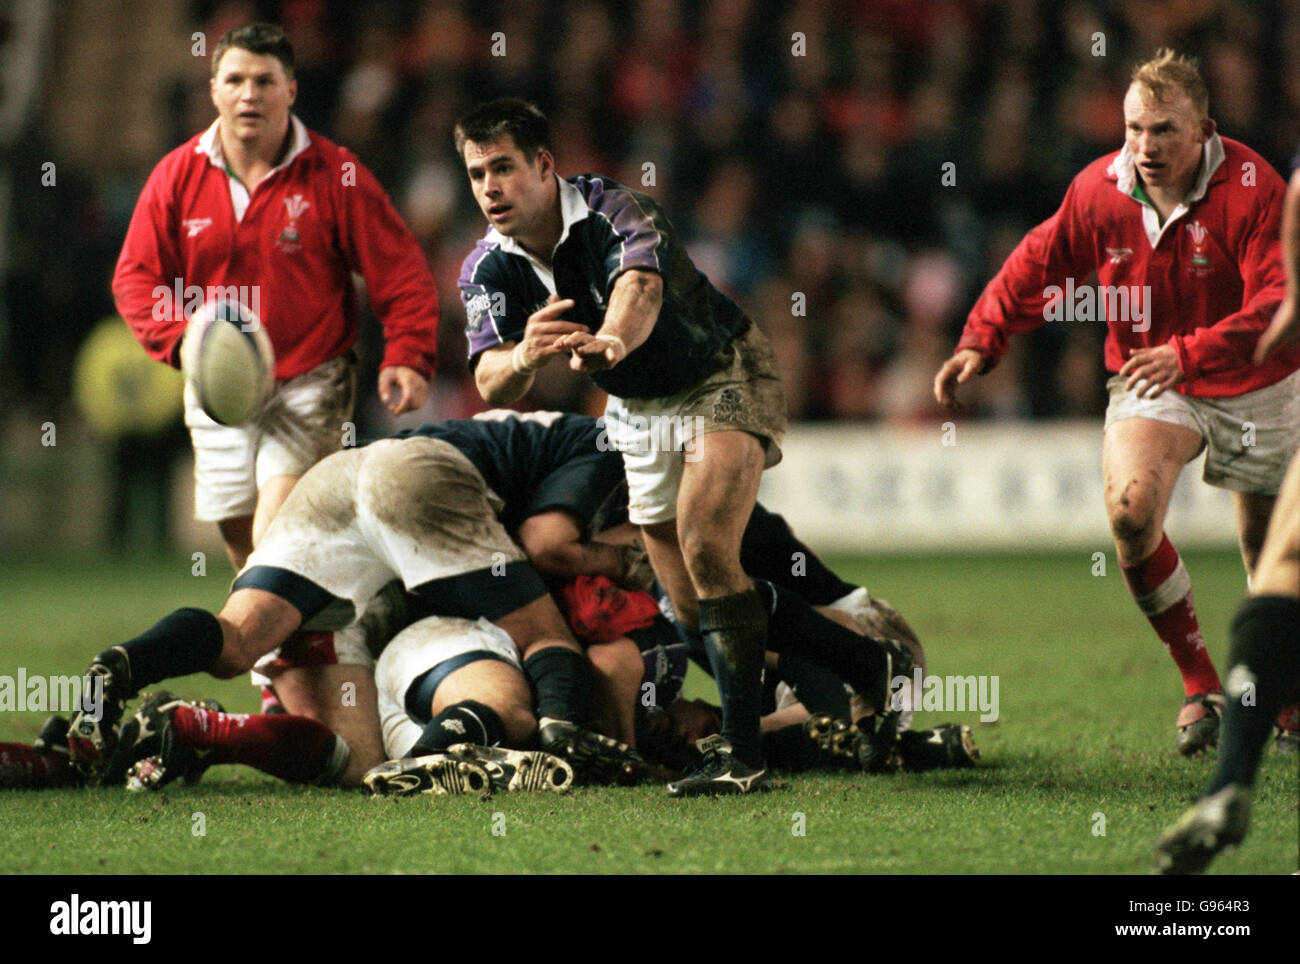 Rugby Union - Five Nations Championship - Scotland v Wales. Scotland's wing Kenny Logan acts as scrumhalf and sends the ball out to the flanks. Stock Photo